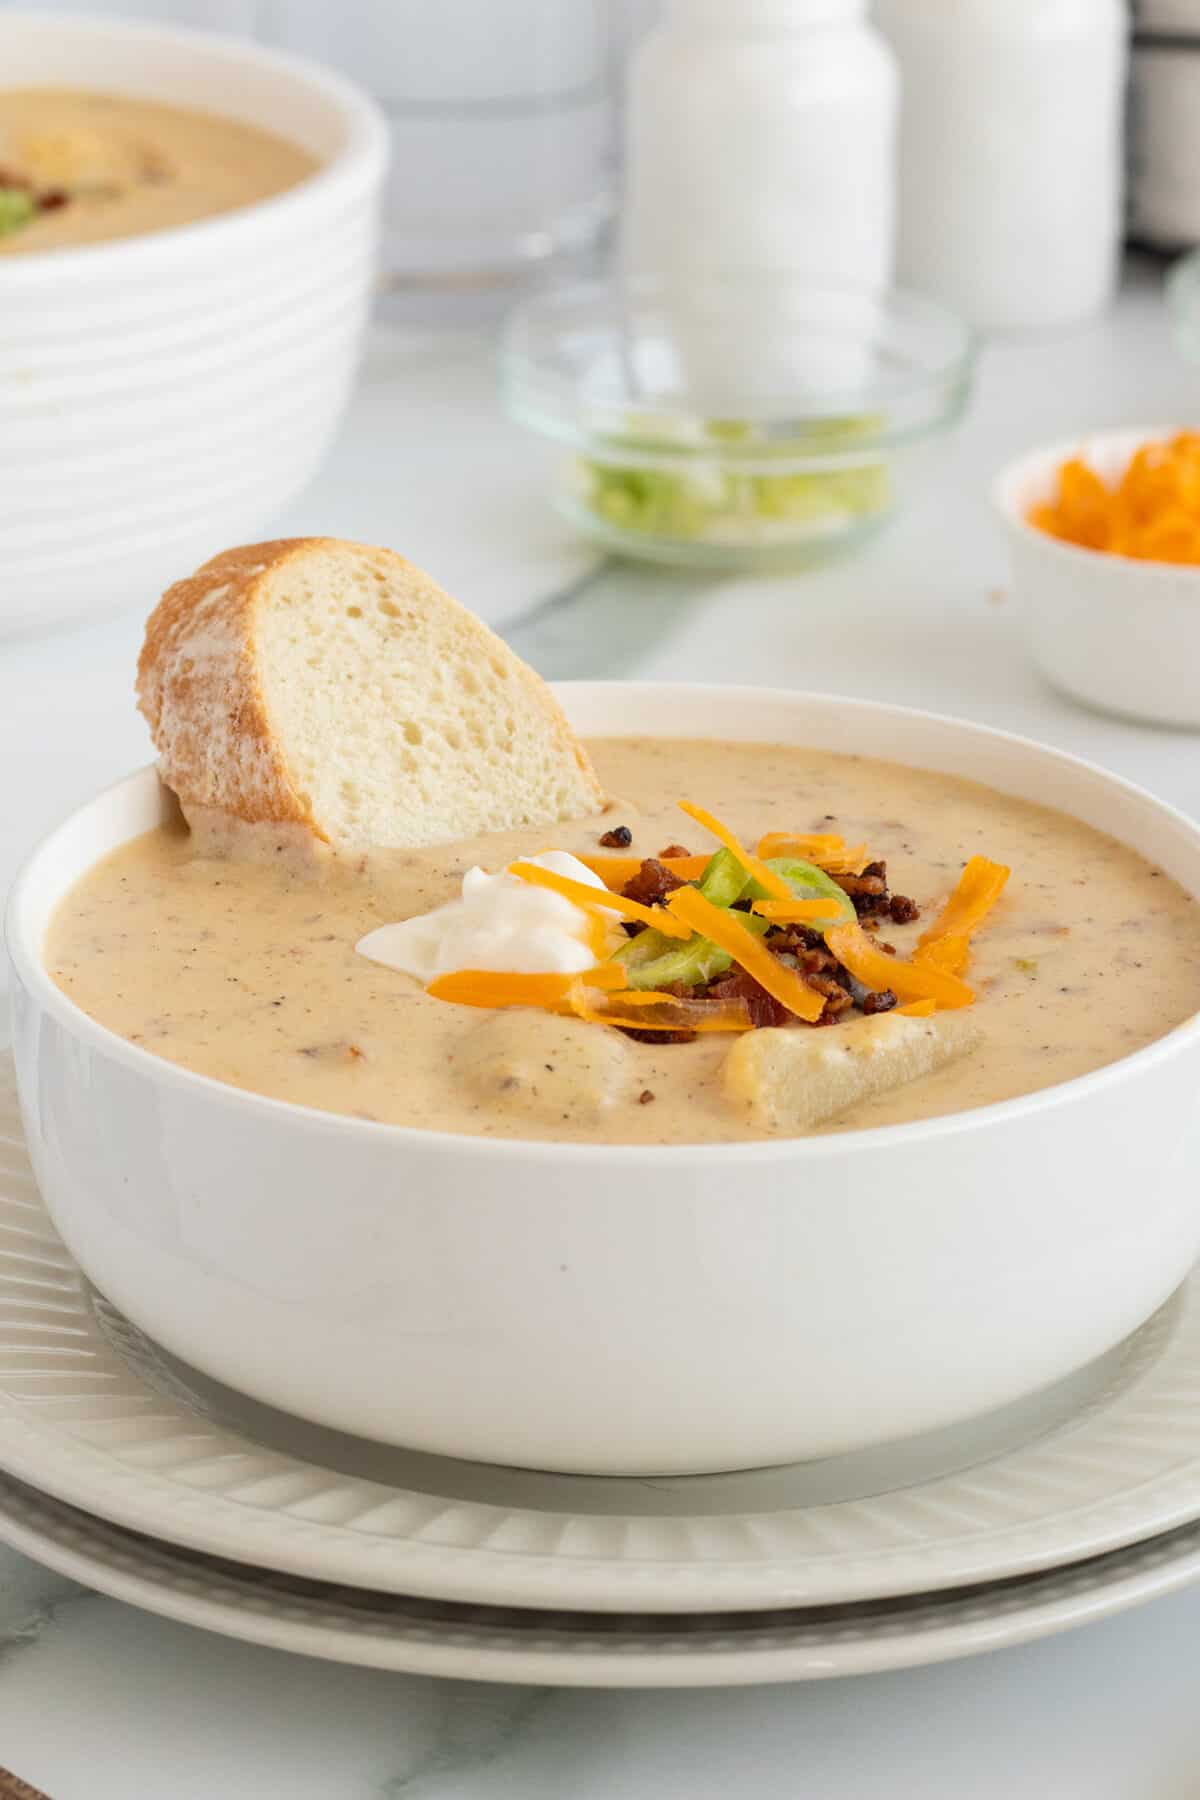 loaded baked potato soup with bread slice in the bowl